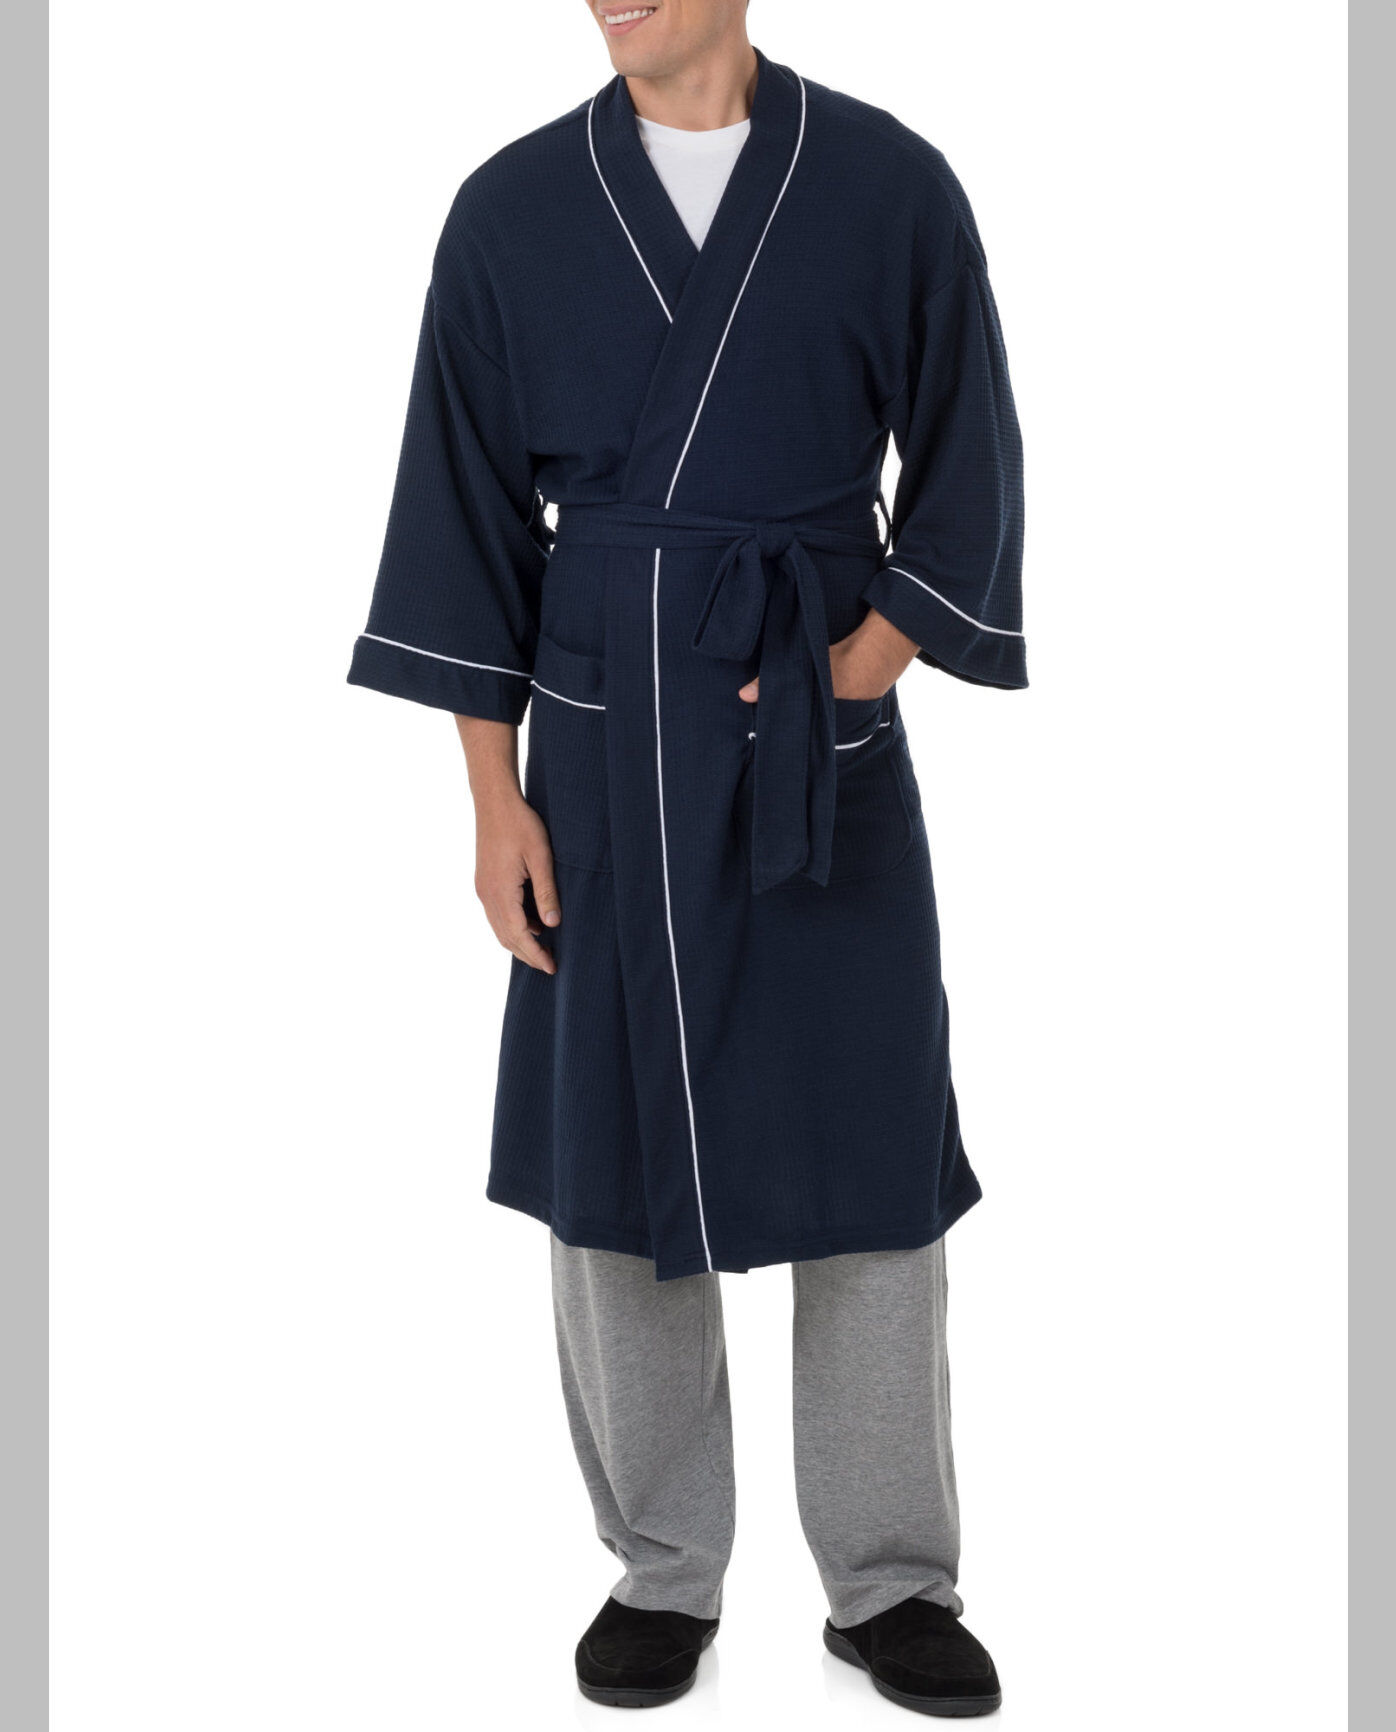 Men's Soft Touch Waffle Robe, 1 Pack, Size 2XL NAVY